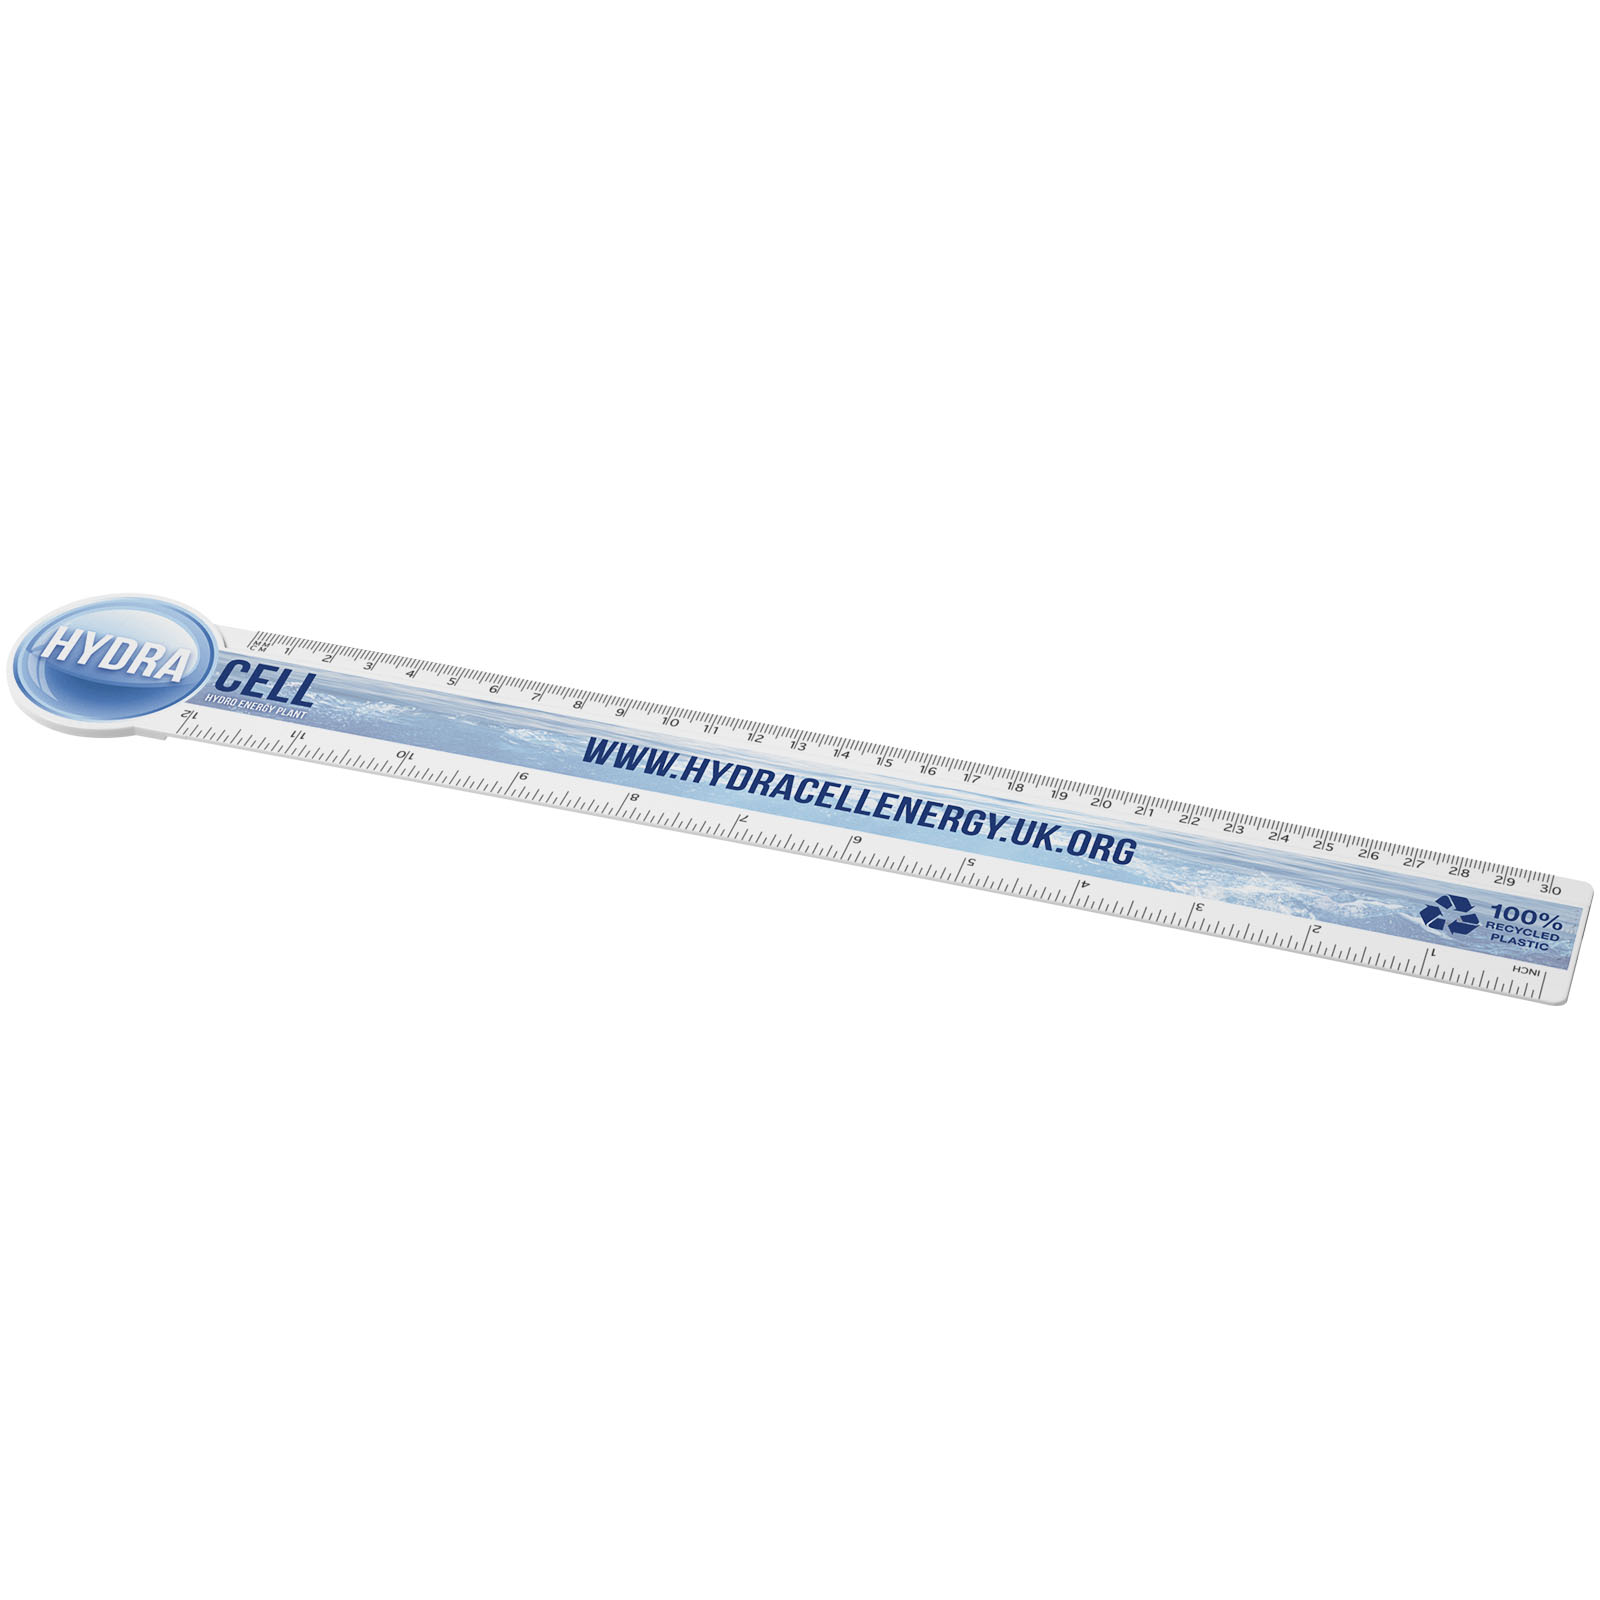 Ruler ARKO made of recycled plastic in the shape of a circle, 30 cm - white